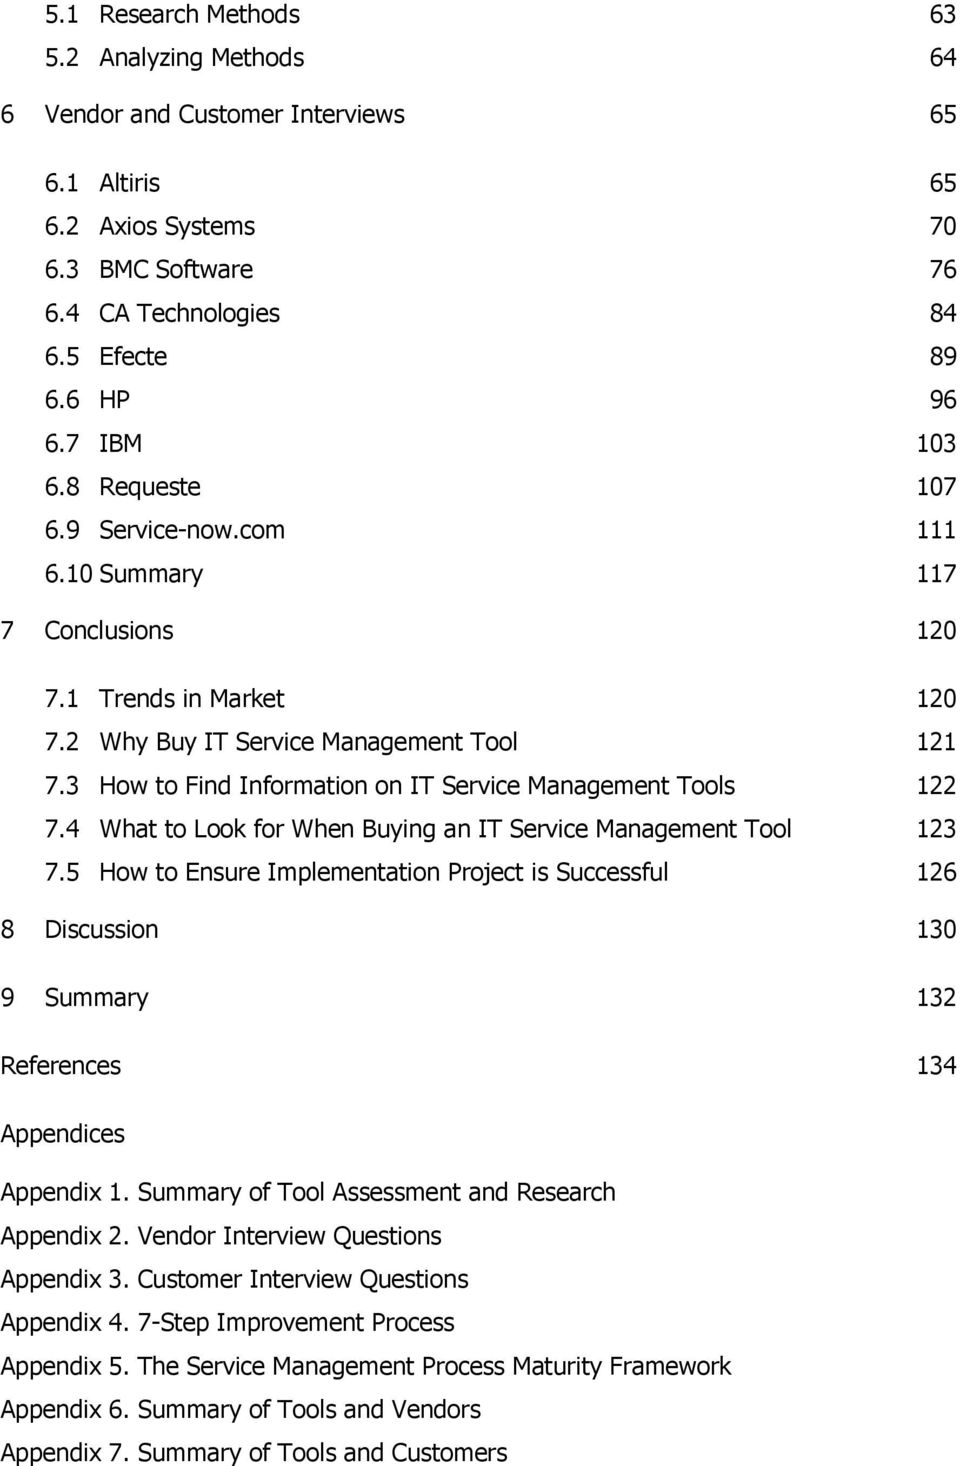 3 How to Find Information on IT Service Management Tools 122 7.4 What to Look for When Buying an IT Service Management Tool 123 7.